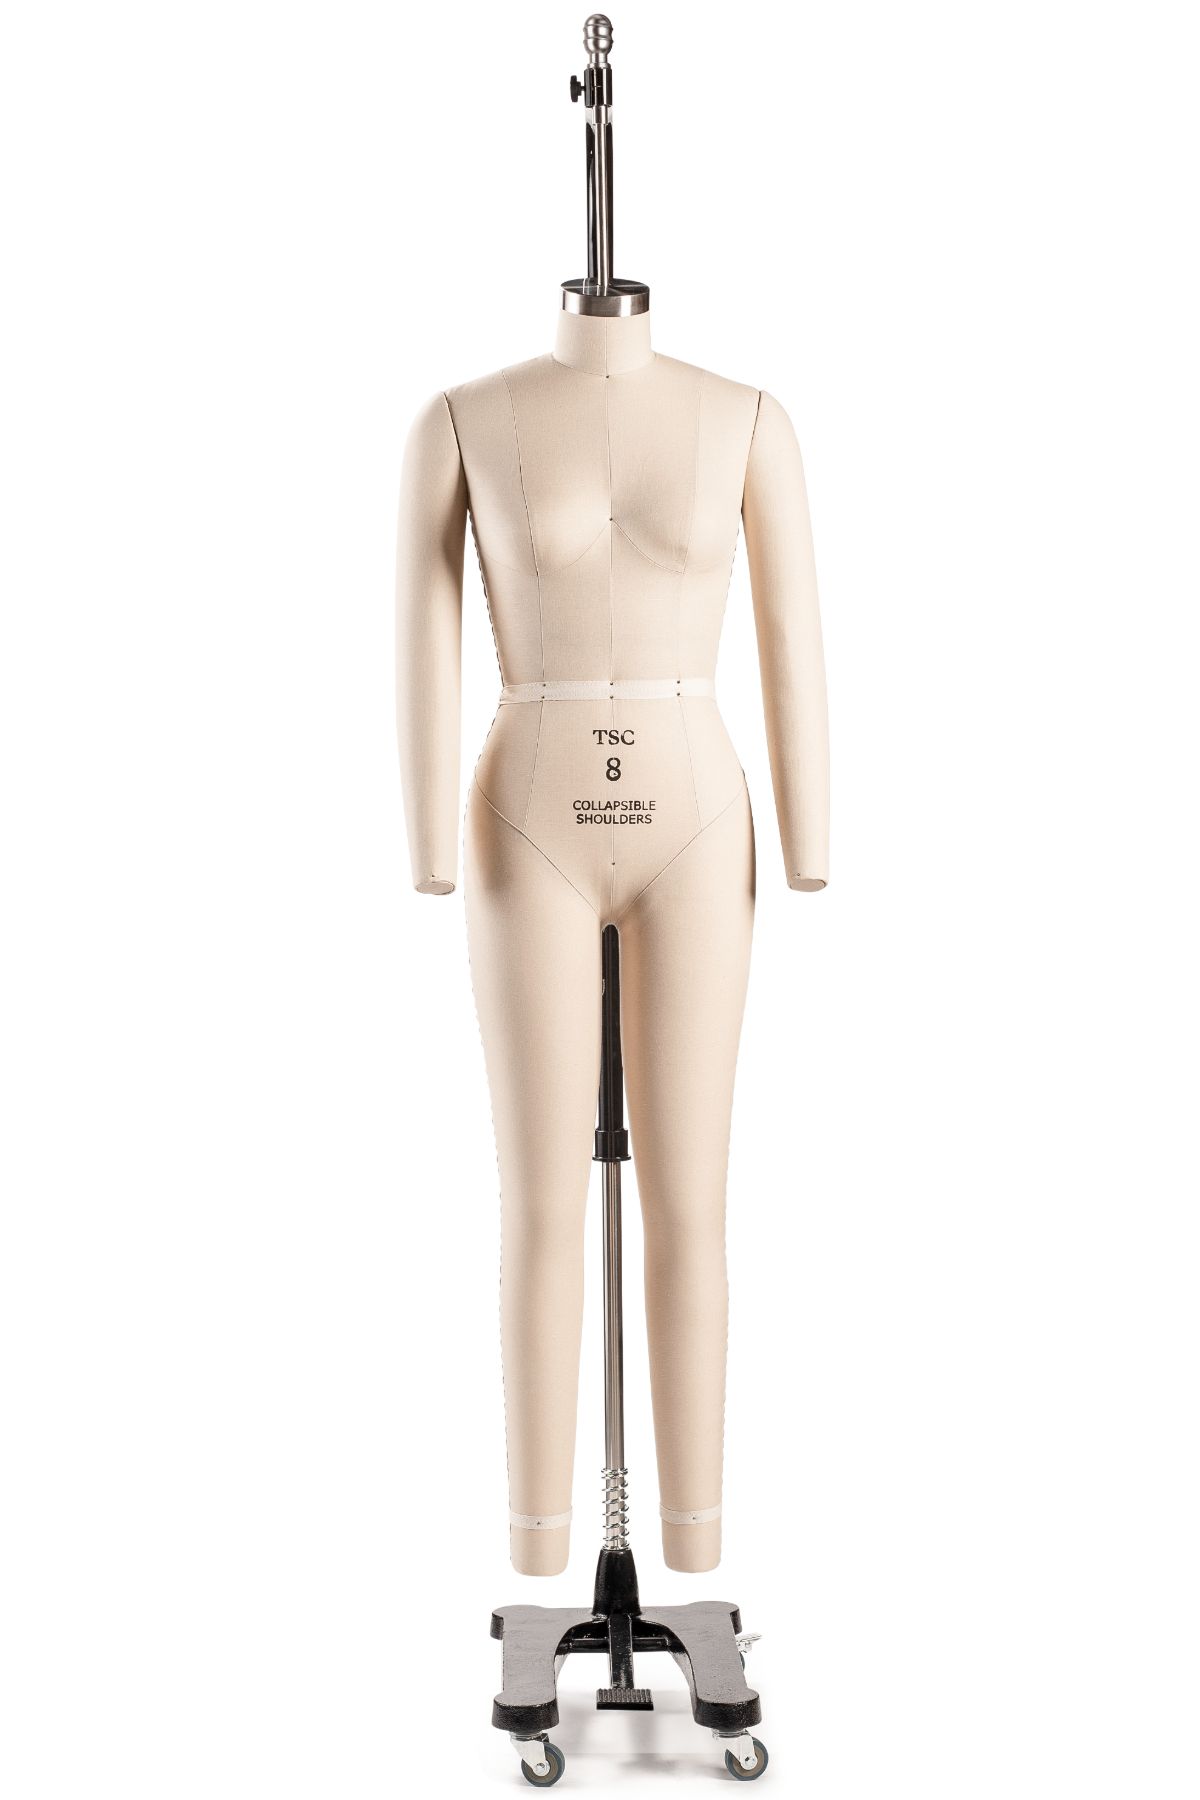 Professional Female Full Body Dress Form w/ Collapsible Shoulders and Legs